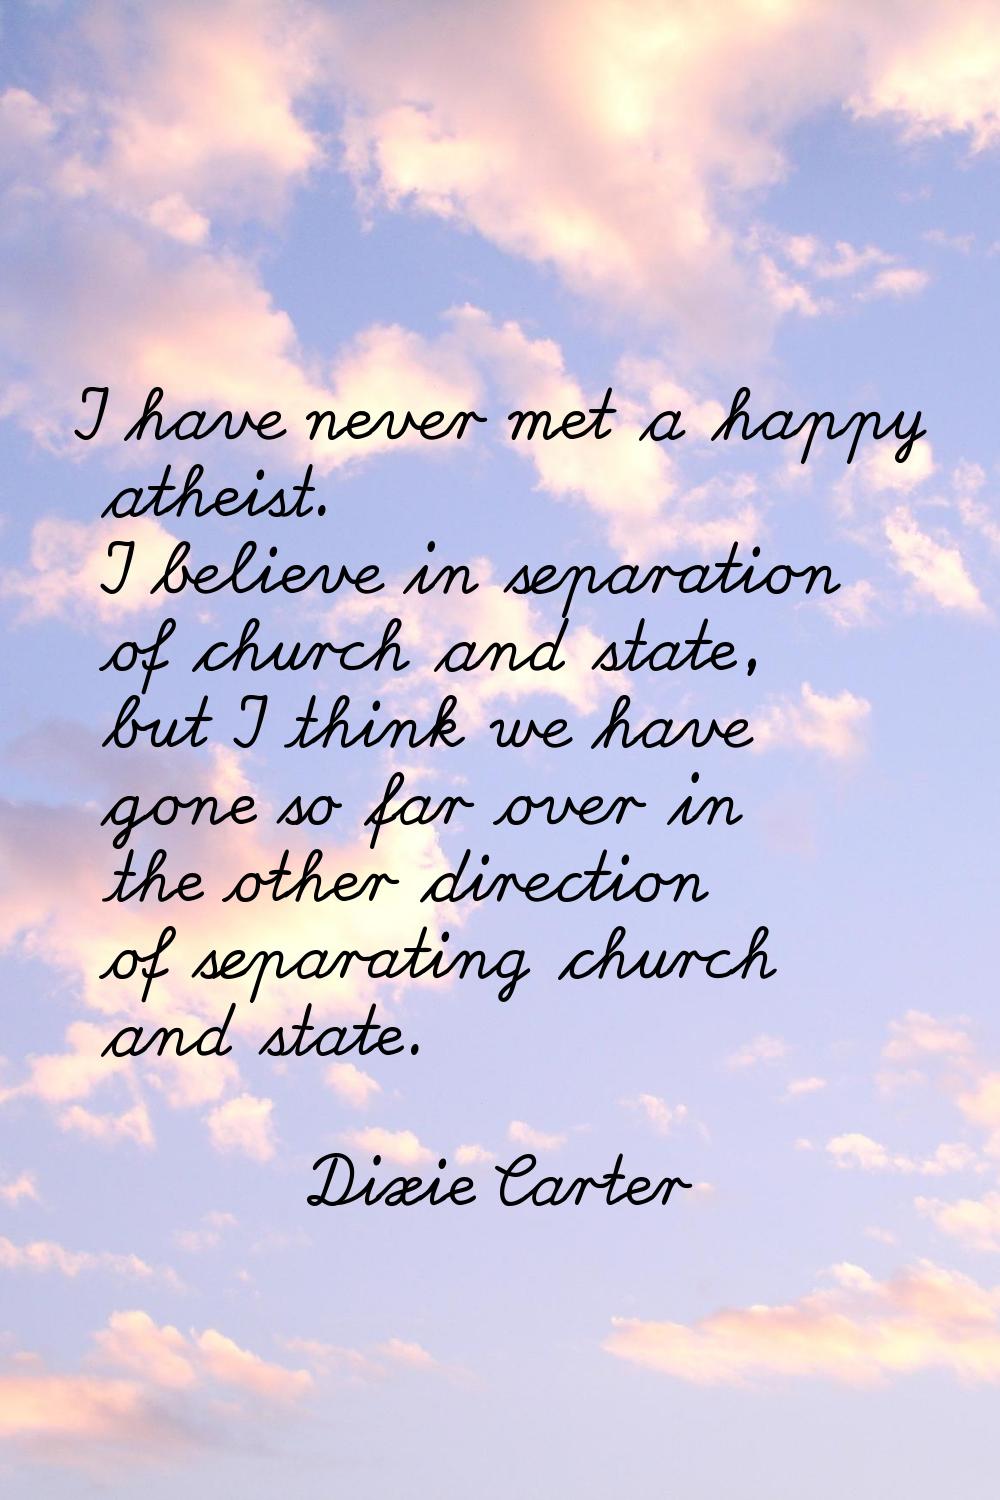 I have never met a happy atheist. I believe in separation of church and state, but I think we have 